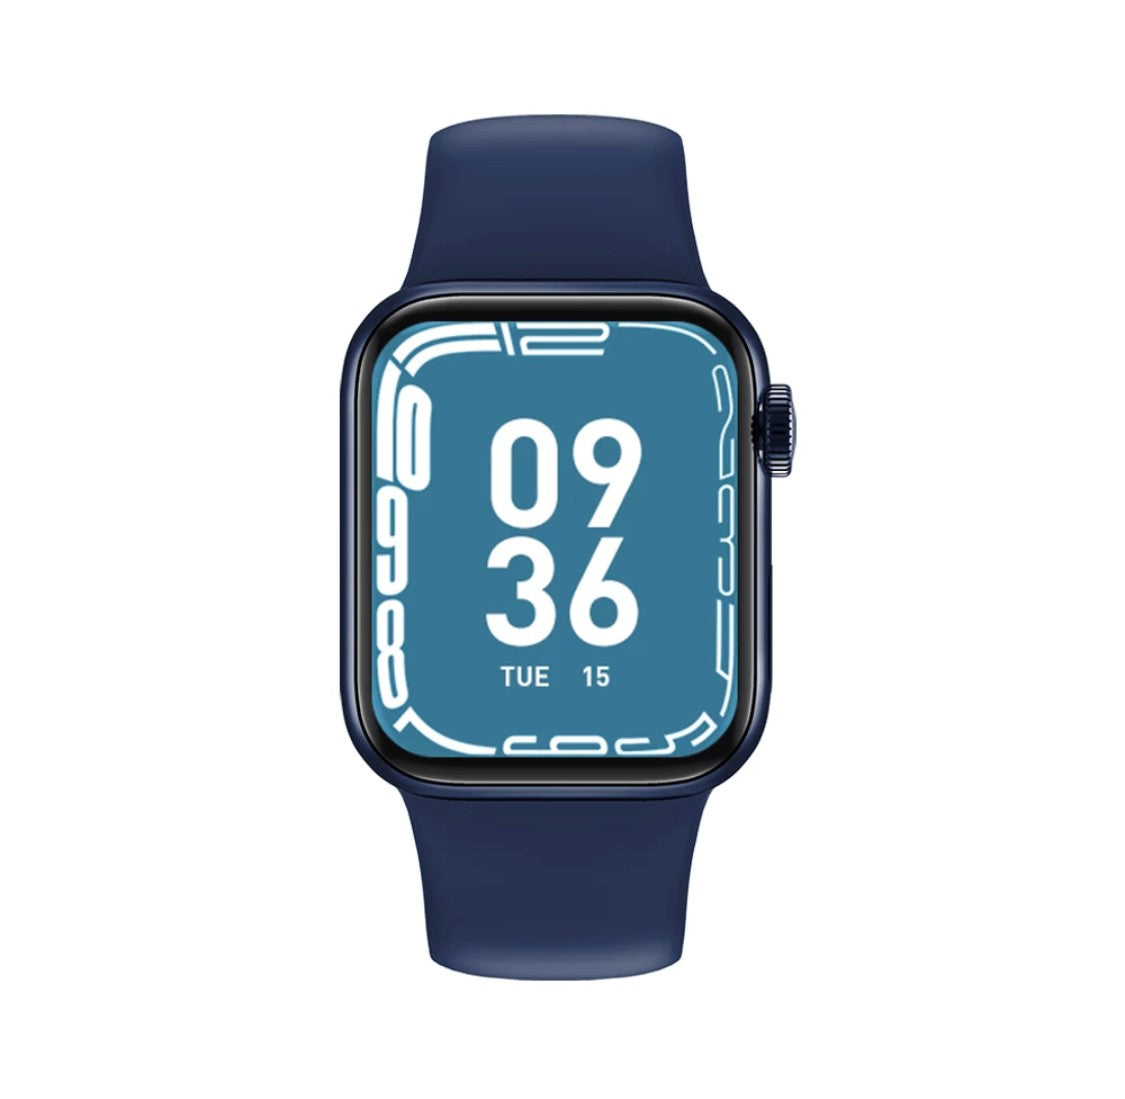 N78 Pro-- Blue-- Verious Colours Extra Straps Availible R68 Each. Smart Watch South Africa